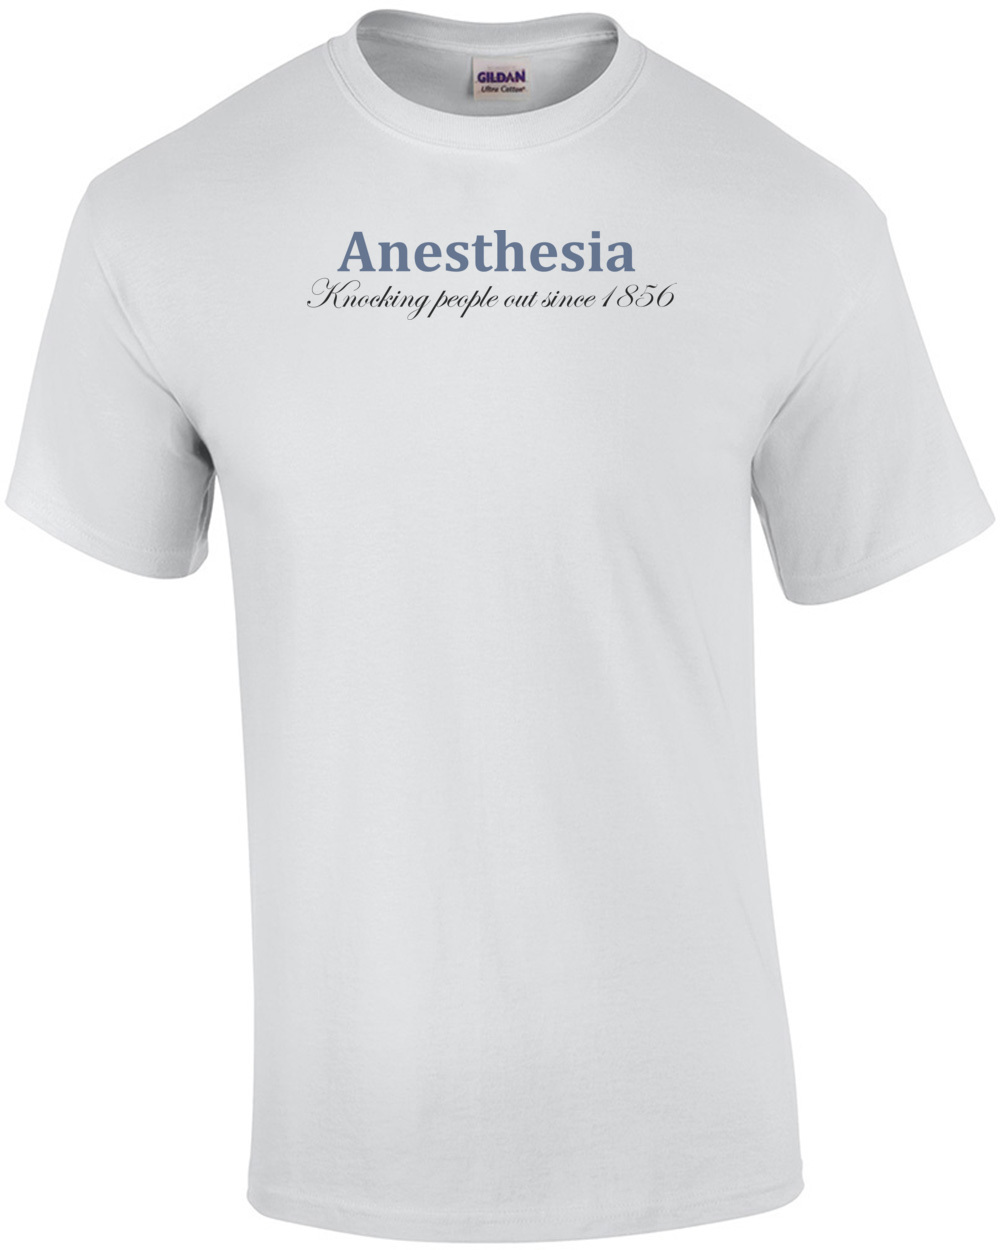 Anesthesia - Knocking people out since 1856 - funny anesthesiologist  t-shirt | eBay